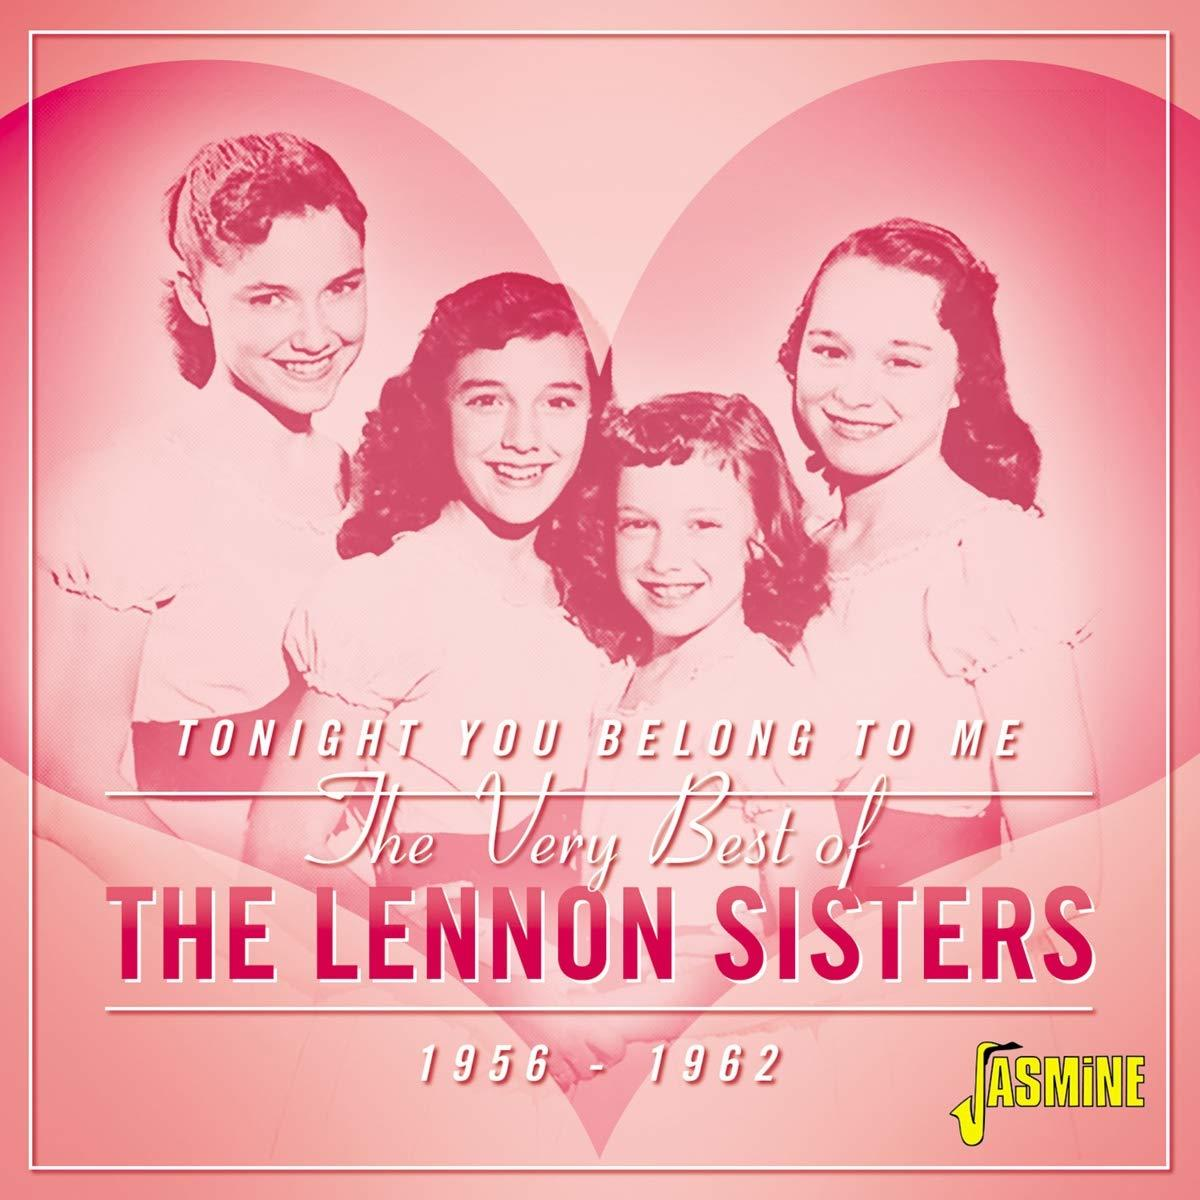 The Lennon Sisters - Of - Very Best (CD)